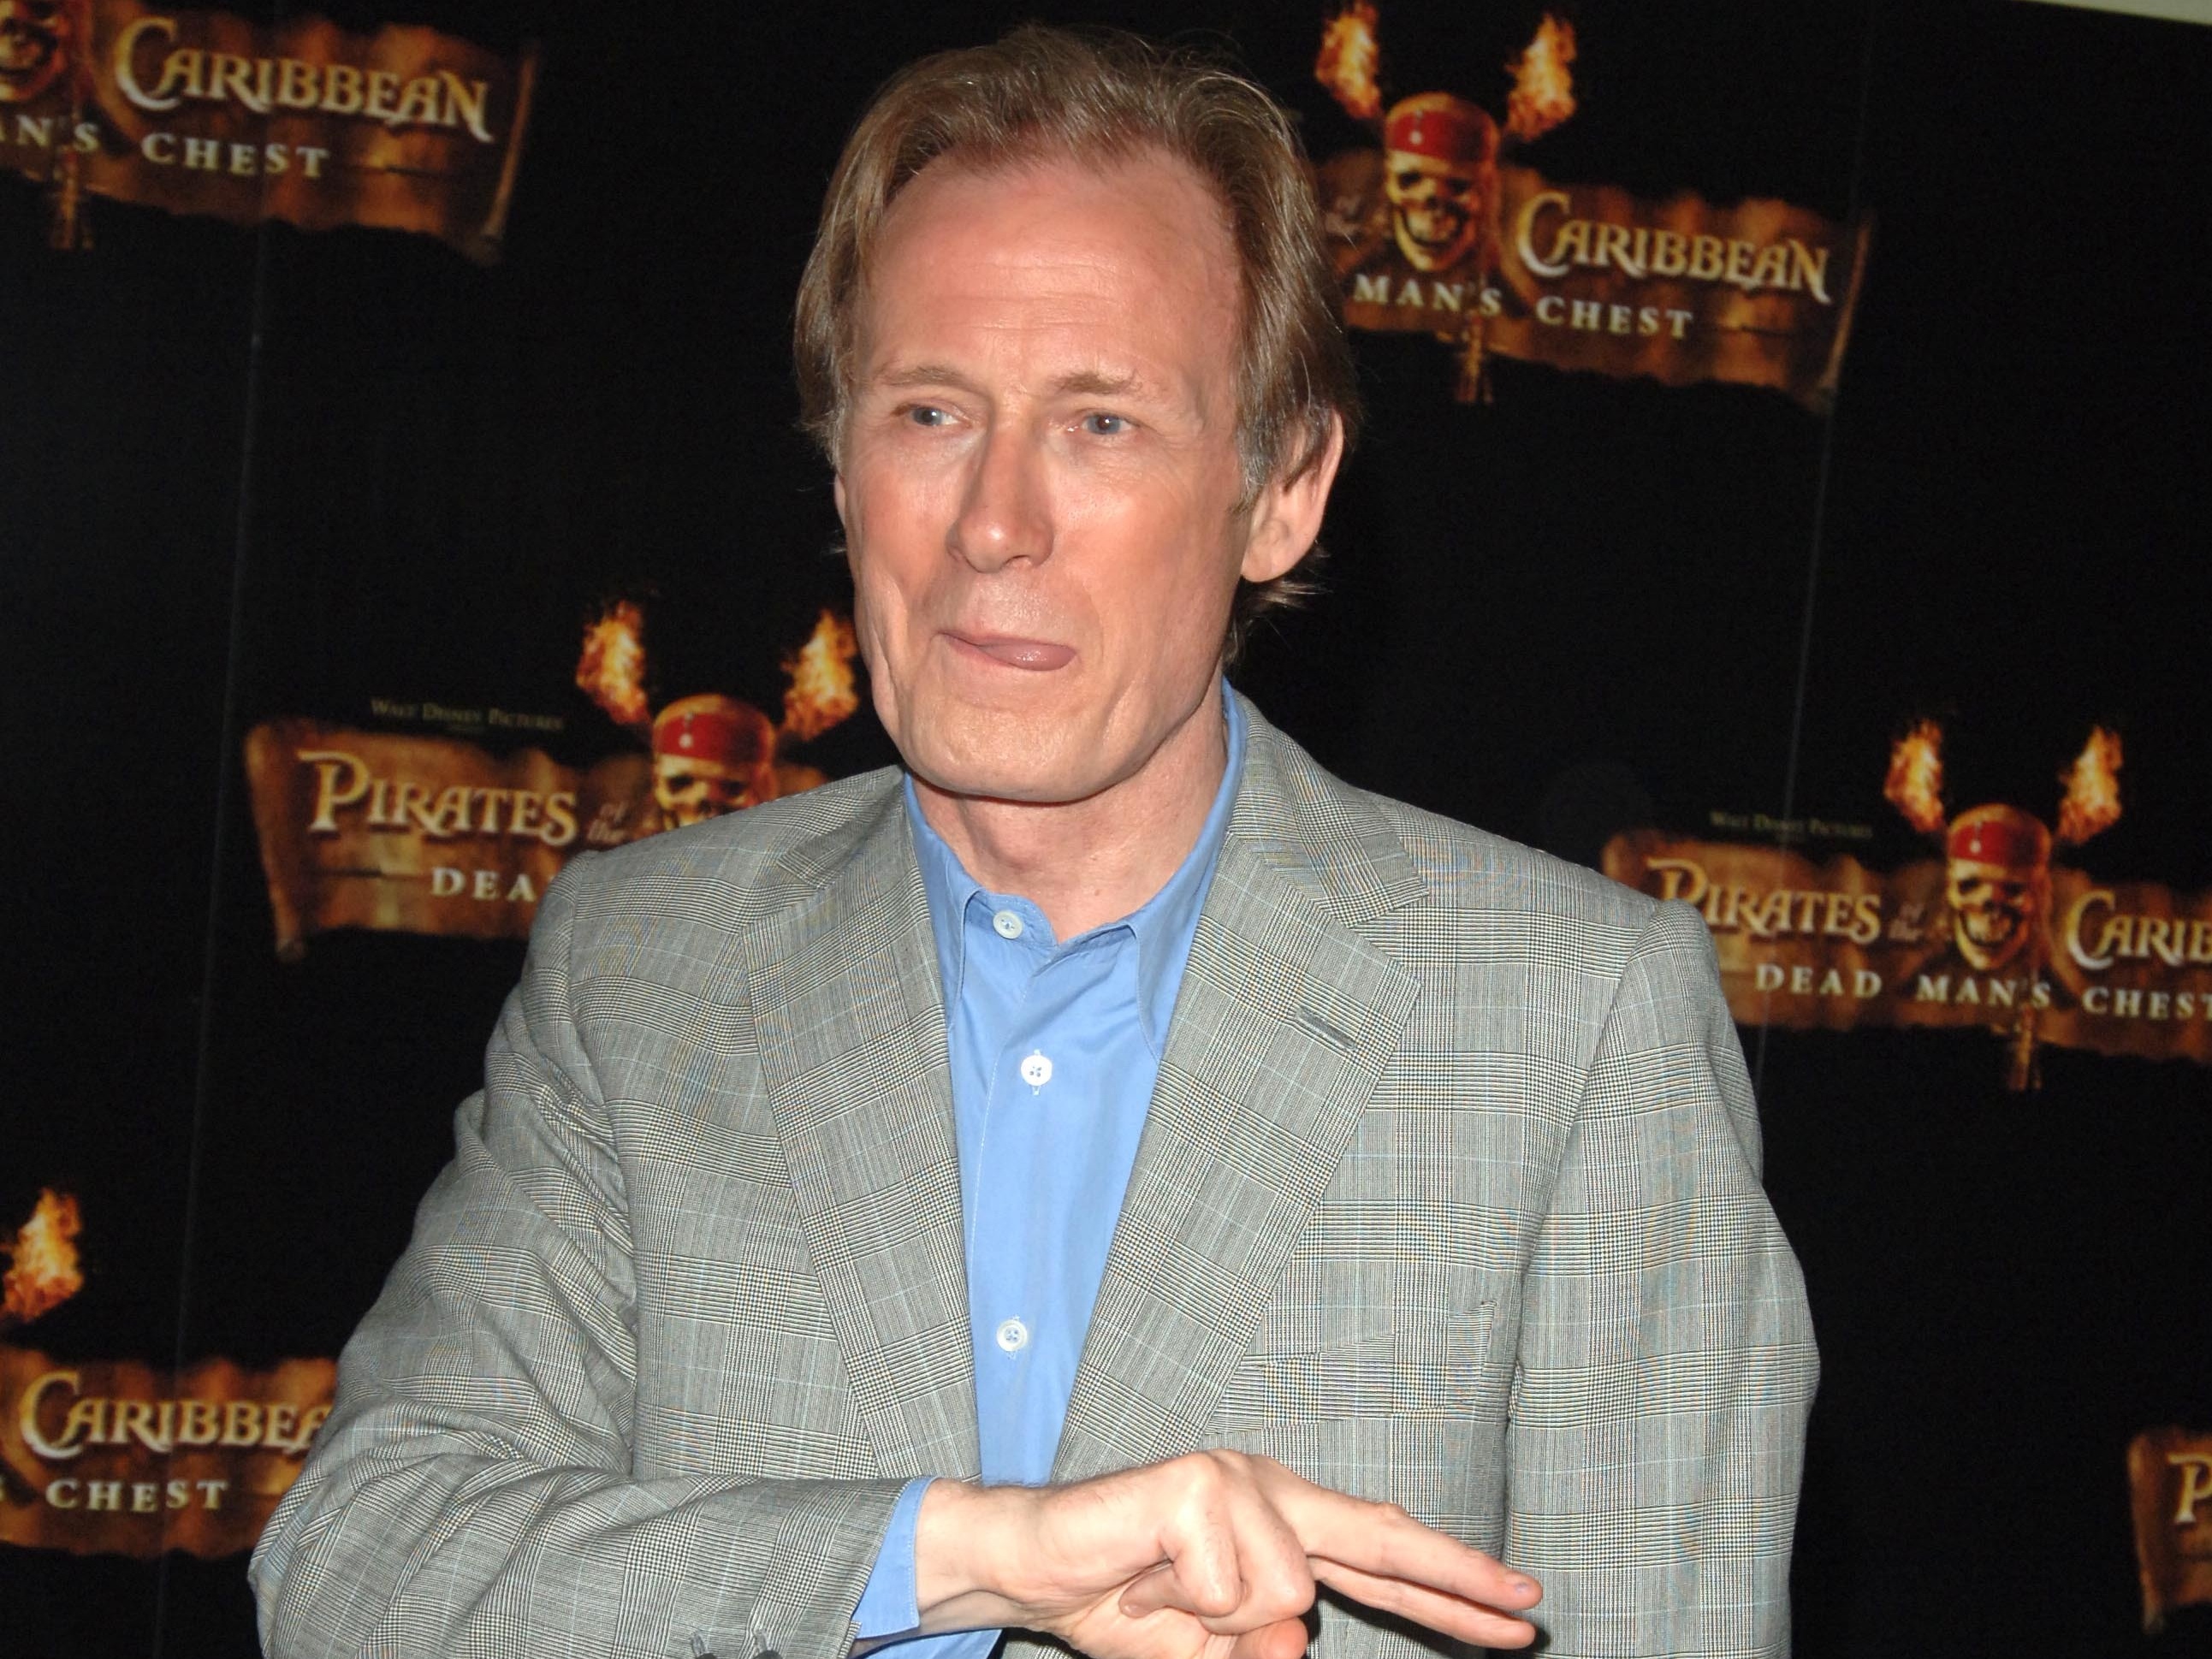 Nighy attends the launch of Pirates Of The Caribbean: Dead Man's Chest in 2006.